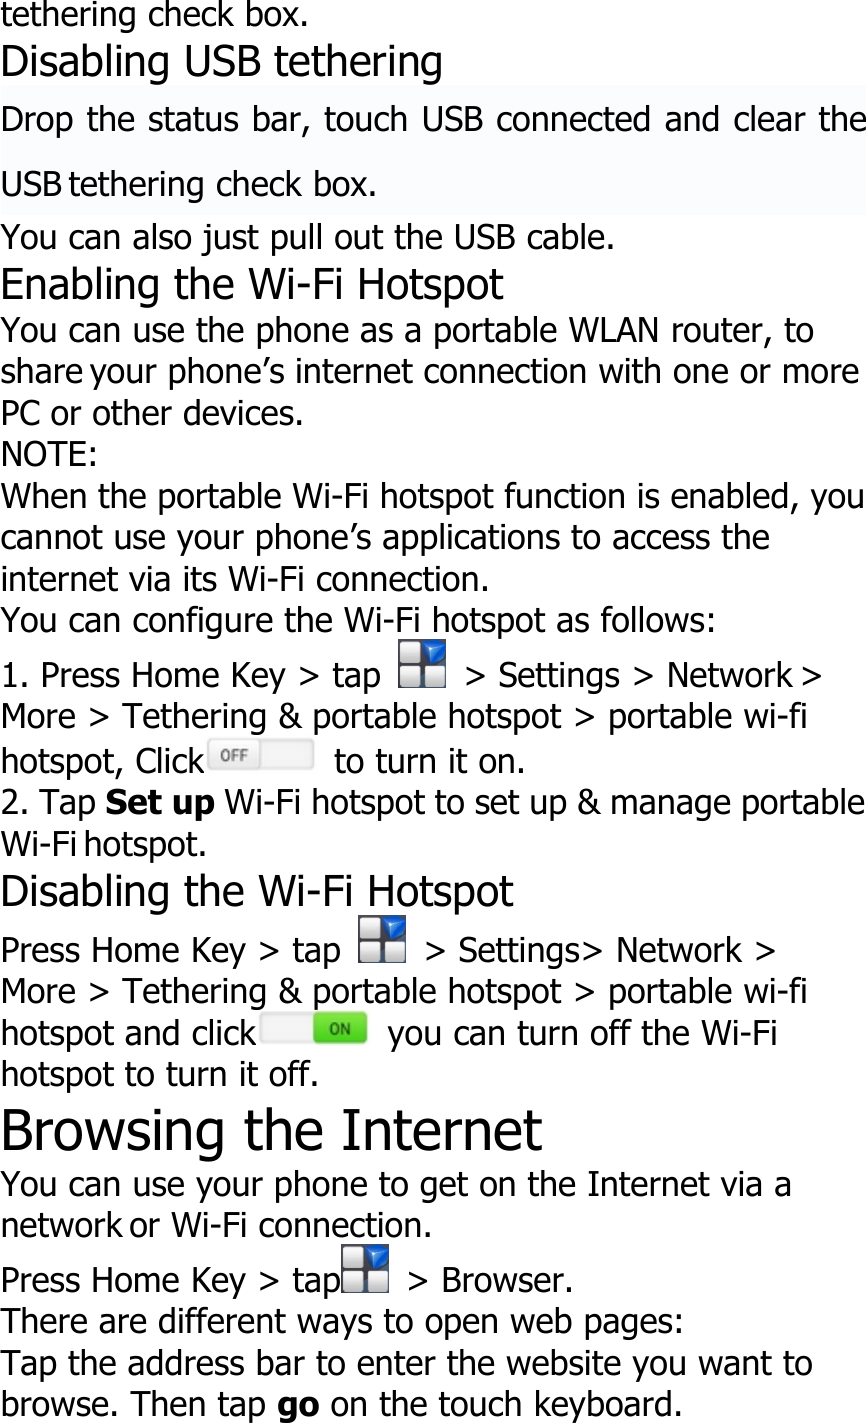 tethering check box.Disabling USB tetheringDrop the status bar, touch USB connected and clear theUSB tethering check box.You can also just pull out the USB cable.Enabling the Wi-Fi HotspotYou can use the phone as a portable WLAN router, toshare your phone’s internet connection with one or morePC or other devices.NOTE:When the portable Wi-Fi hotspot function is enabled, youcannot use your phone’s applications to access theinternet via its Wi-Fi connection.You can configure the Wi-Fi hotspot as follows:1. Press Home Key &gt; tap &gt; Settings &gt; Network &gt;More &gt; Tethering &amp; portable hotspot &gt; portable wi-fihotspot, Click to turn it on.2. Tap Set up Wi-Fi hotspot to set up &amp; manage portableWi-Fi hotspot.Disabling the Wi-Fi HotspotPress Home Key &gt; tap &gt; Settings&gt; Network &gt;More &gt; Tethering &amp; portable hotspot &gt; portable wi-fihotspot and click you can turn off the Wi-Fihotspot to turn it off.Browsing the InternetYou can use your phone to get on the Internet via anetwork or Wi-Fi connection.Press Home Key &gt; tap &gt; Browser.There are different ways to open web pages:Tap the address bar to enter the website you want tobrowse. Then tap go on the touch keyboard.